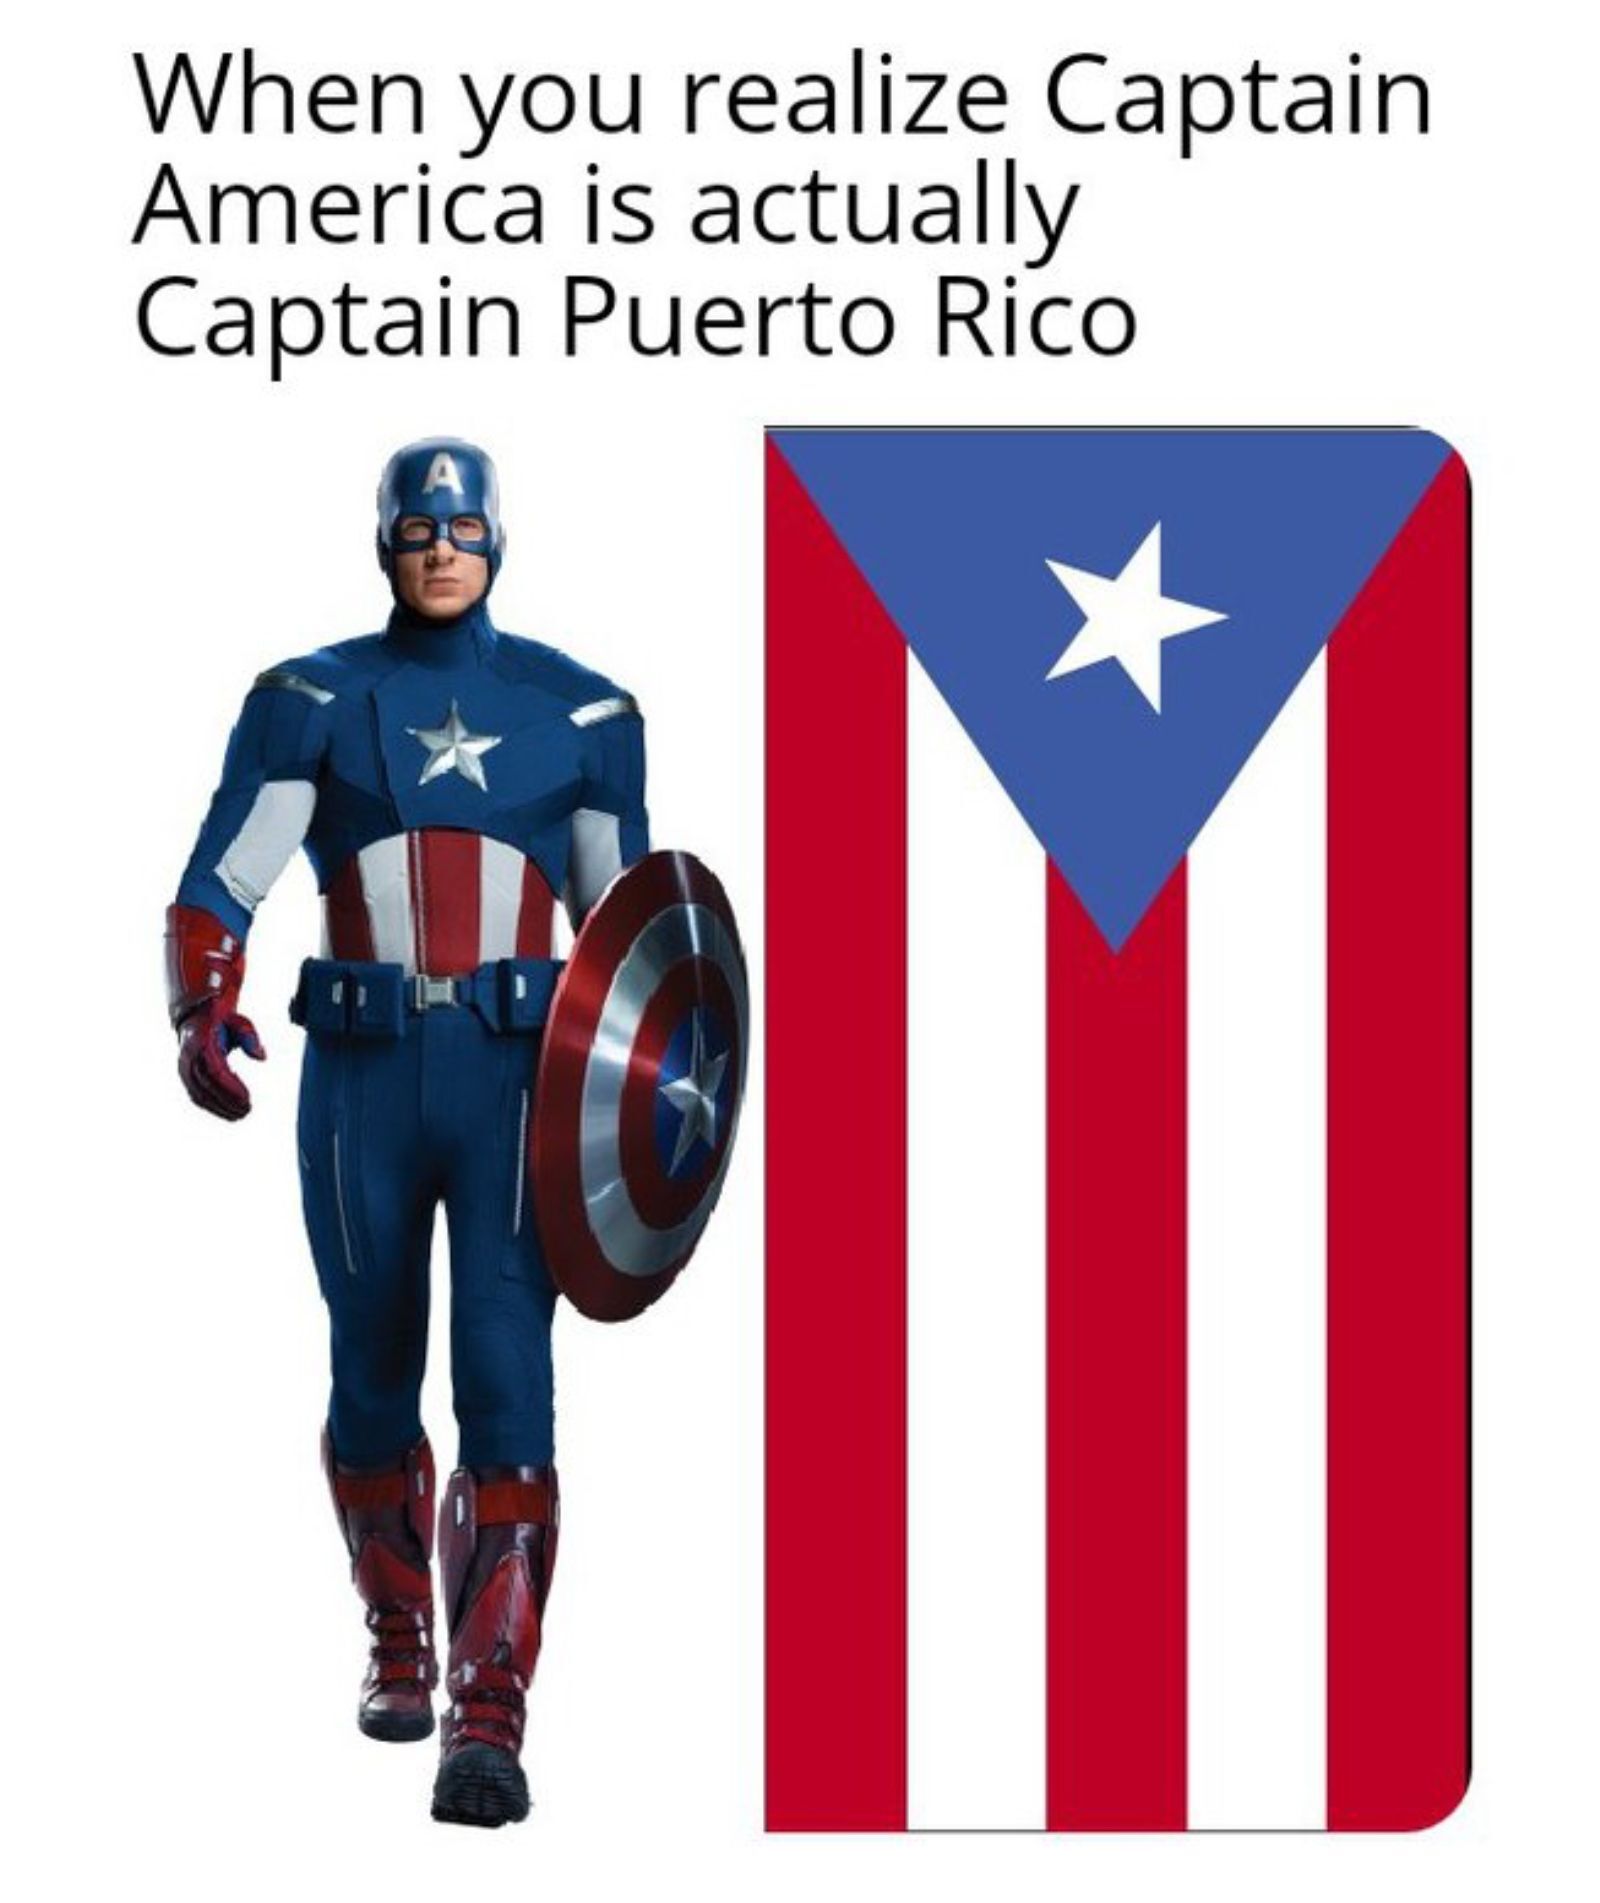 Since Captain America is only brandishing a single star, he's actually Captain Puerto Rico though.